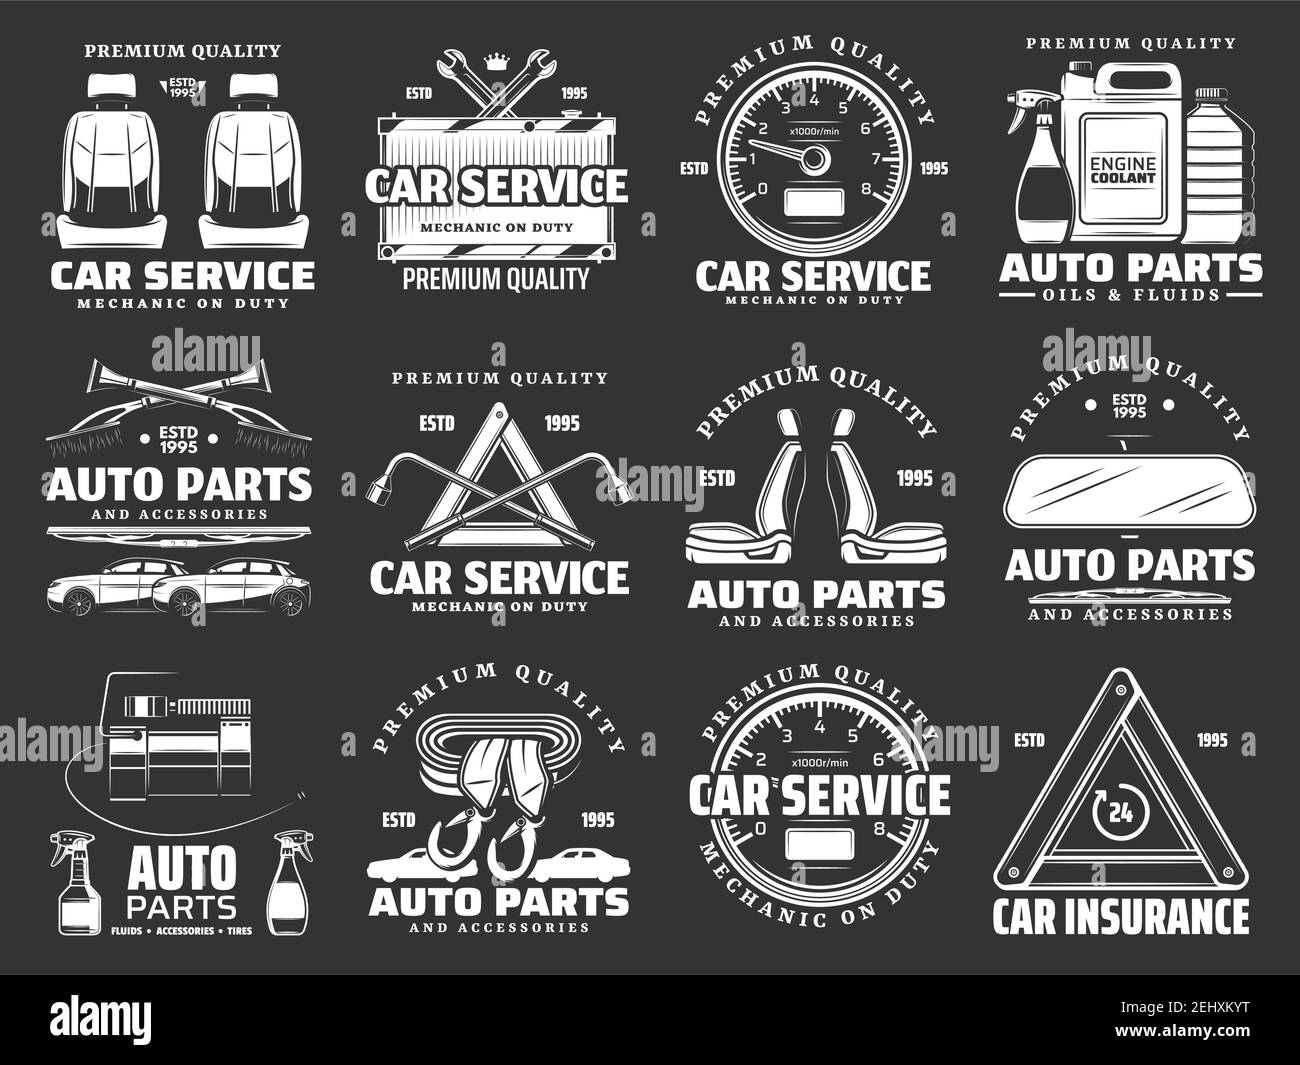 Auto parts and car accessories icons of car repair service and auto mechanic garage. Motor oil, tire, spanner or wrench, car seats, wiper and mirror, Stock Vector